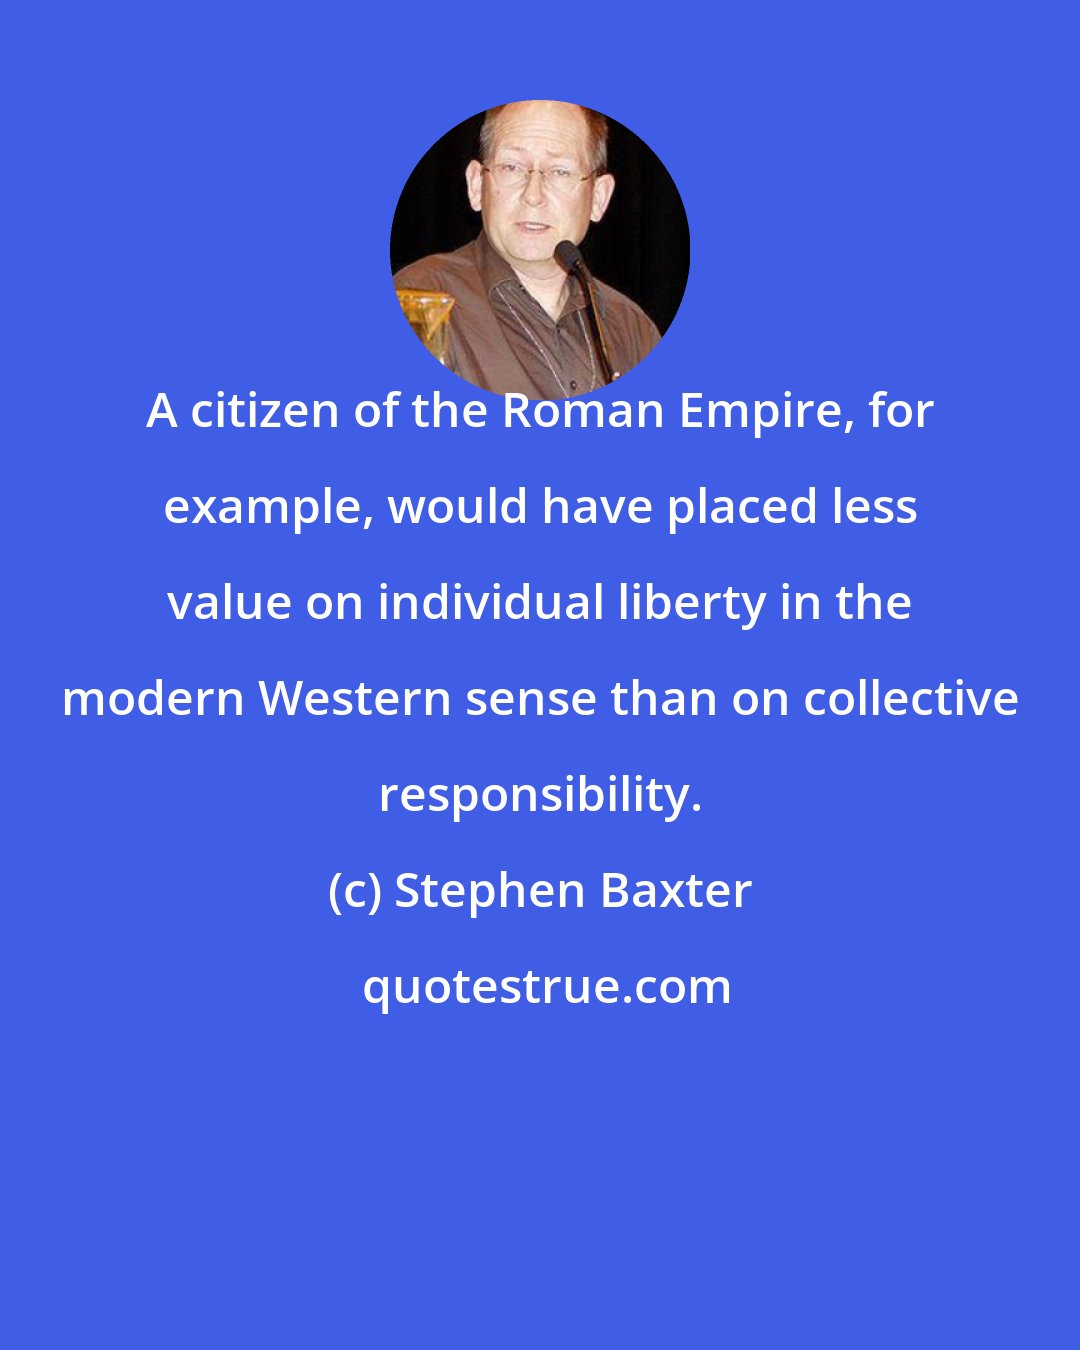 Stephen Baxter: A citizen of the Roman Empire, for example, would have placed less value on individual liberty in the modern Western sense than on collective responsibility.